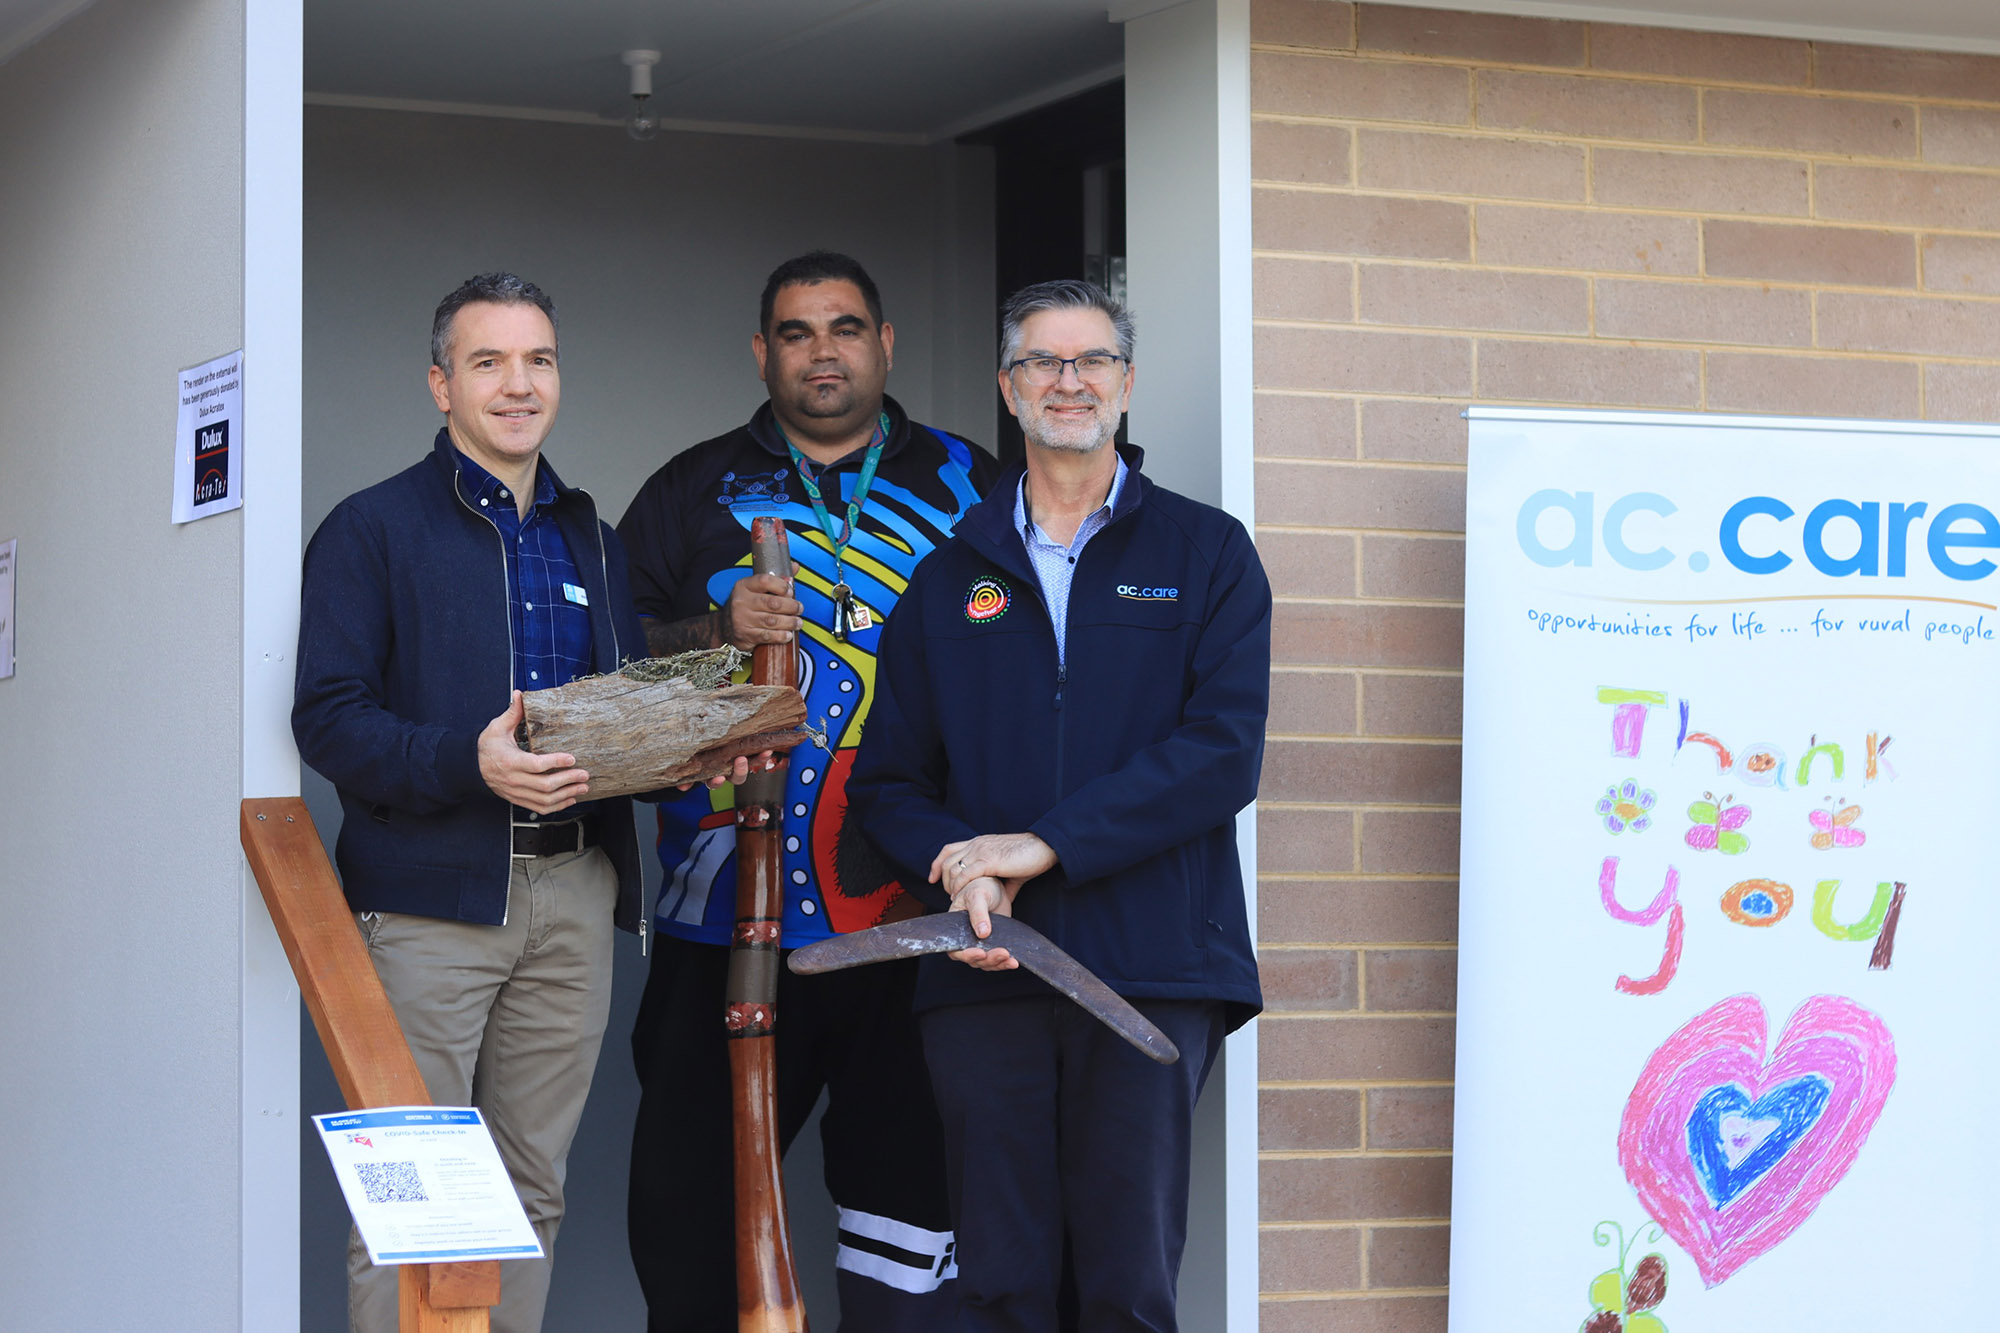 COMMUNITY ACHIEVEMENT: Habitat for Humanity South Australian executive director Ben 
Sarre, Ngarrindjeri man Harley Hall and ac.care chief executive officer Shane Maddocks celebrate 
the completion of the Studio Purpose project to convert a disused South Australian Housing 
Authority property into four apartments for youths at risk of homelessness.